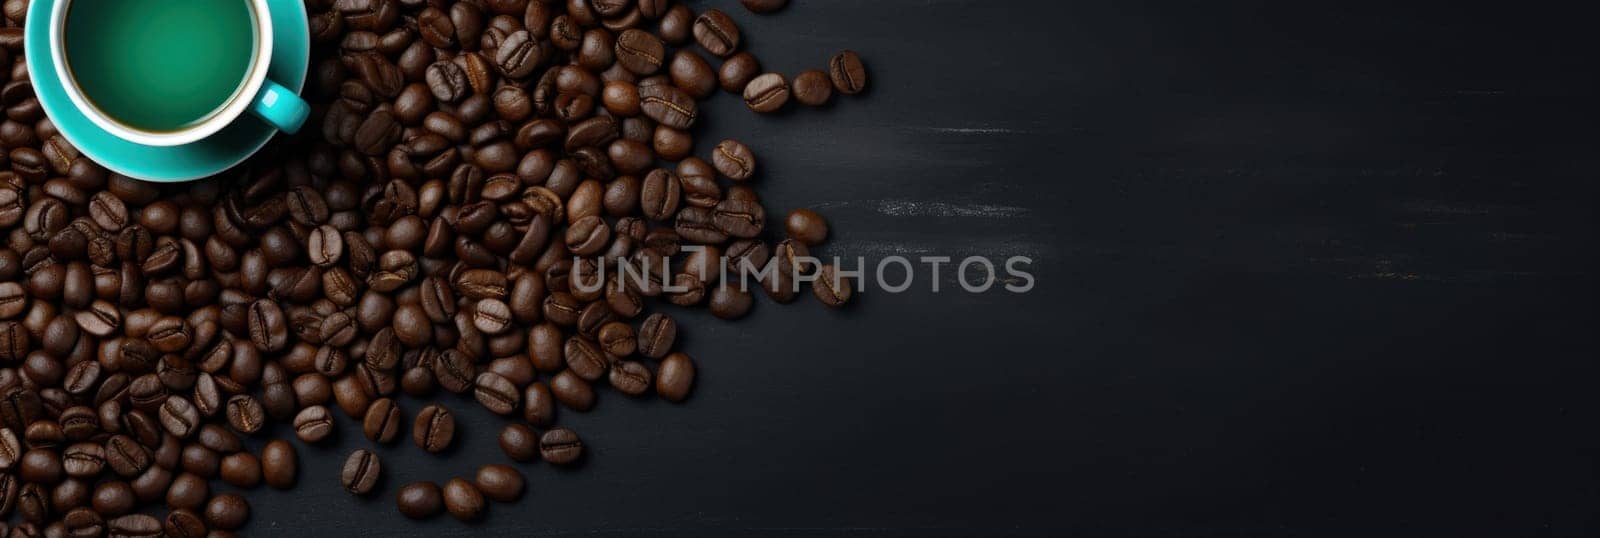 A cup of coffee surrounded by a pile of roasted beans